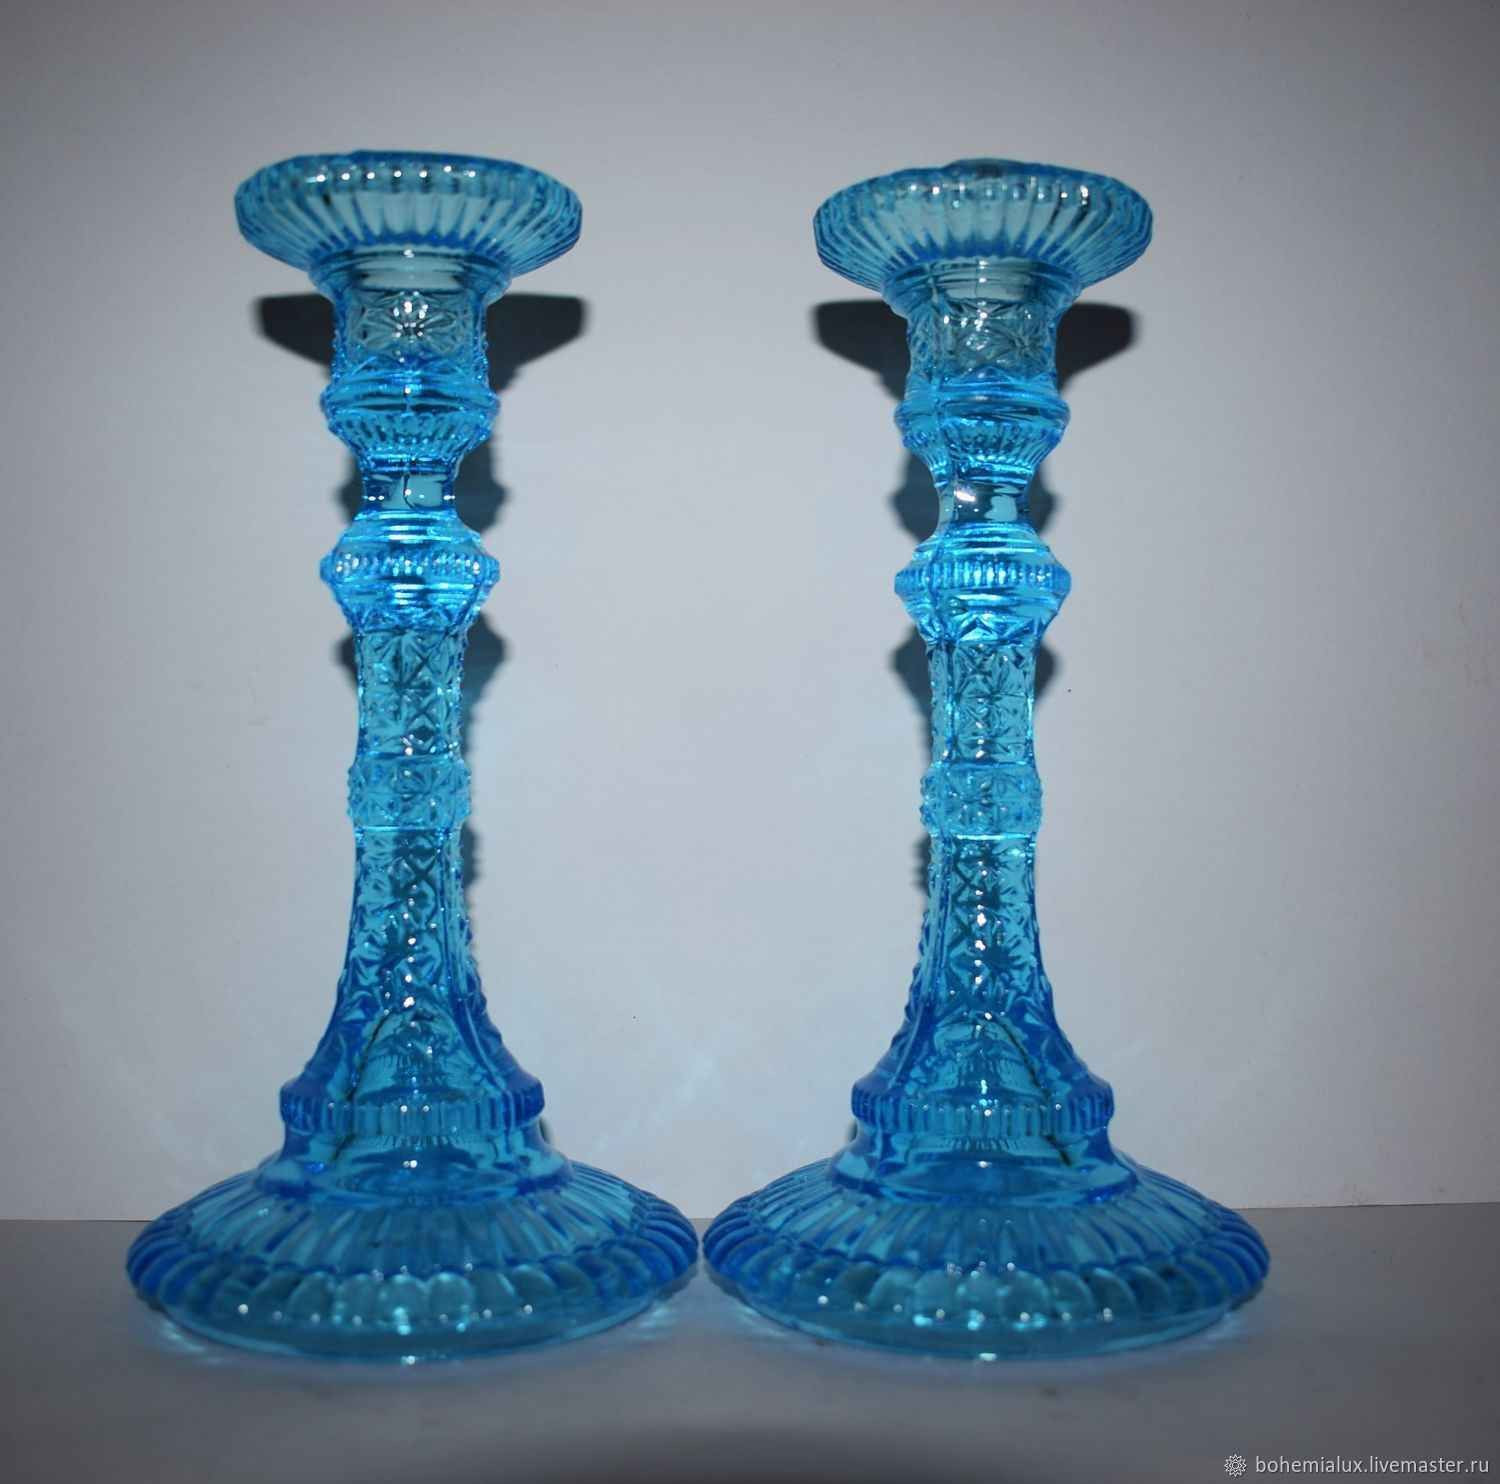 27 Lovable Marquis 11 Crystal Vase 2024 free download marquis 11 crystal vase of lenox china vase best of candle holder where to buy candle holders throughout lenox china vase best of candle holder where to buy candle holders beautiful svecnjak